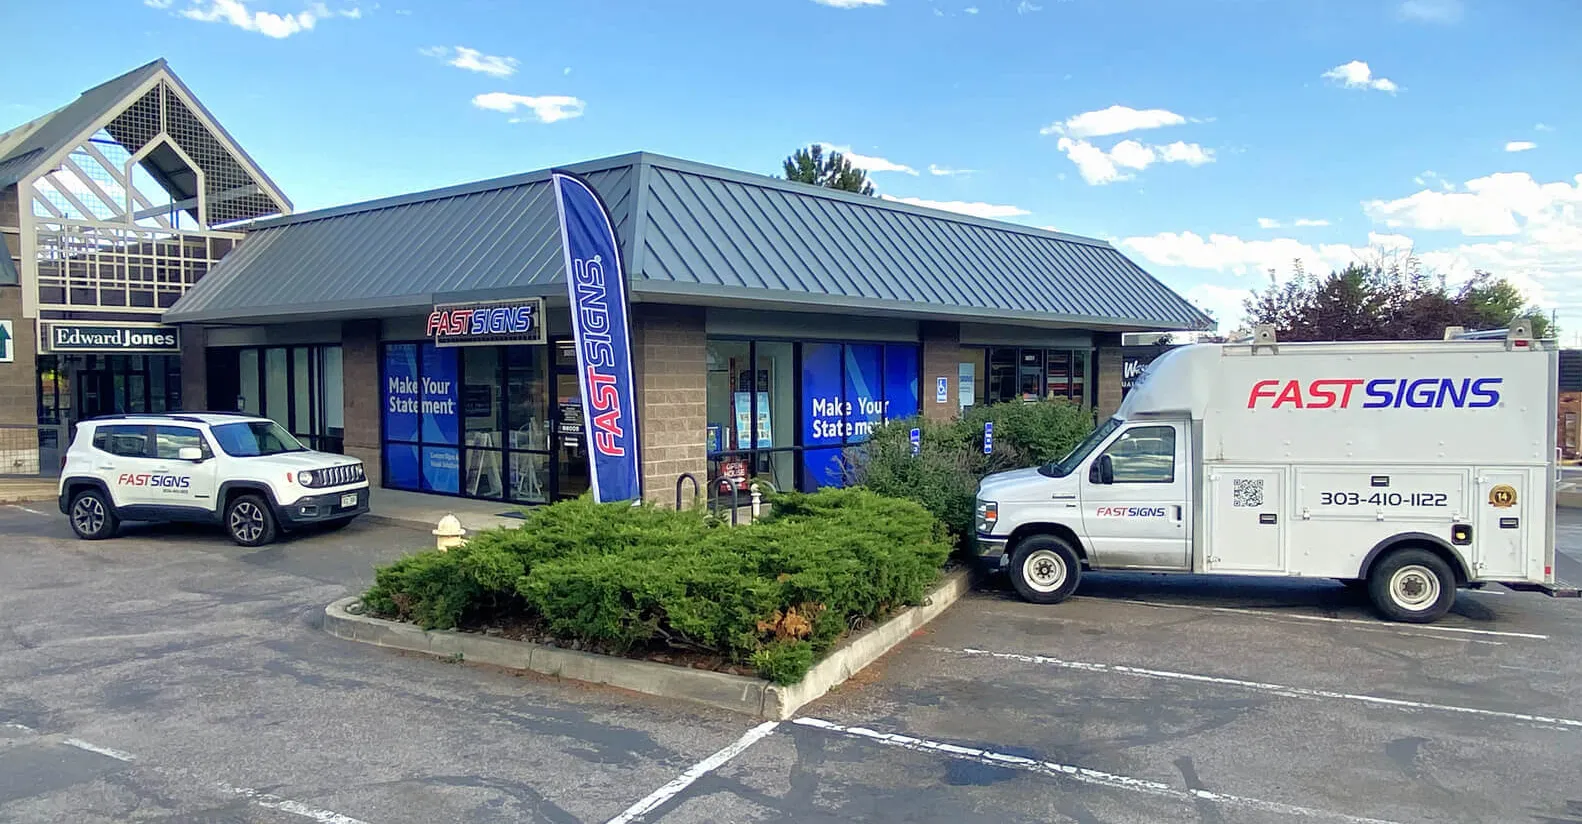 FASTSIGNS Franchise Opportunity